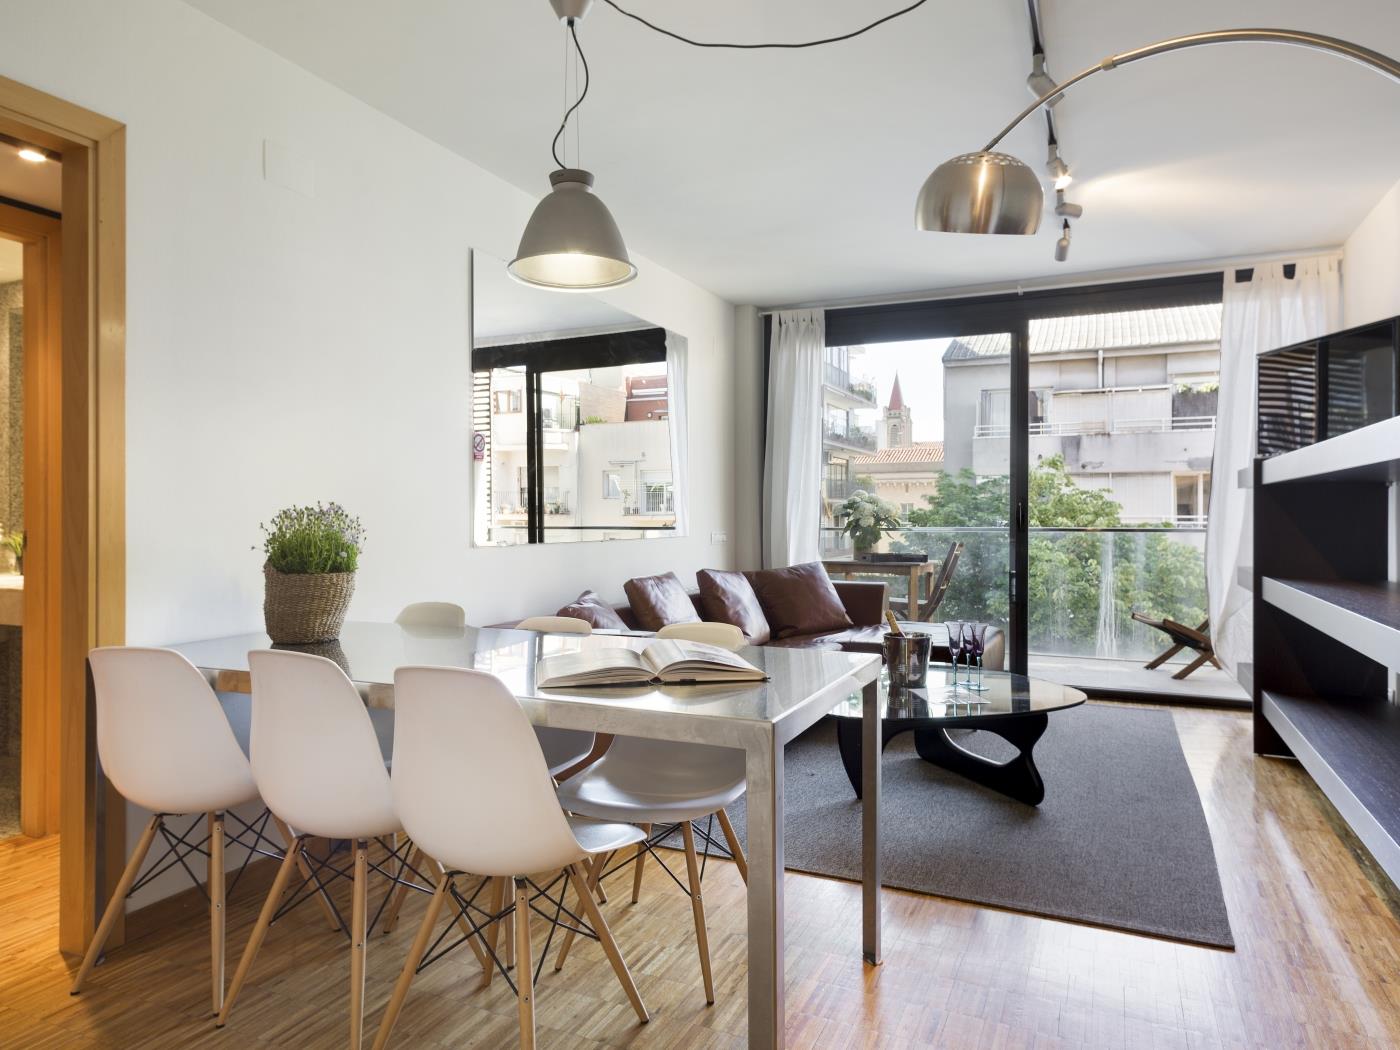 6 apartments in Barcelona city centre for up to 36 pax with small terrace each - My Space Barcelona Apartments